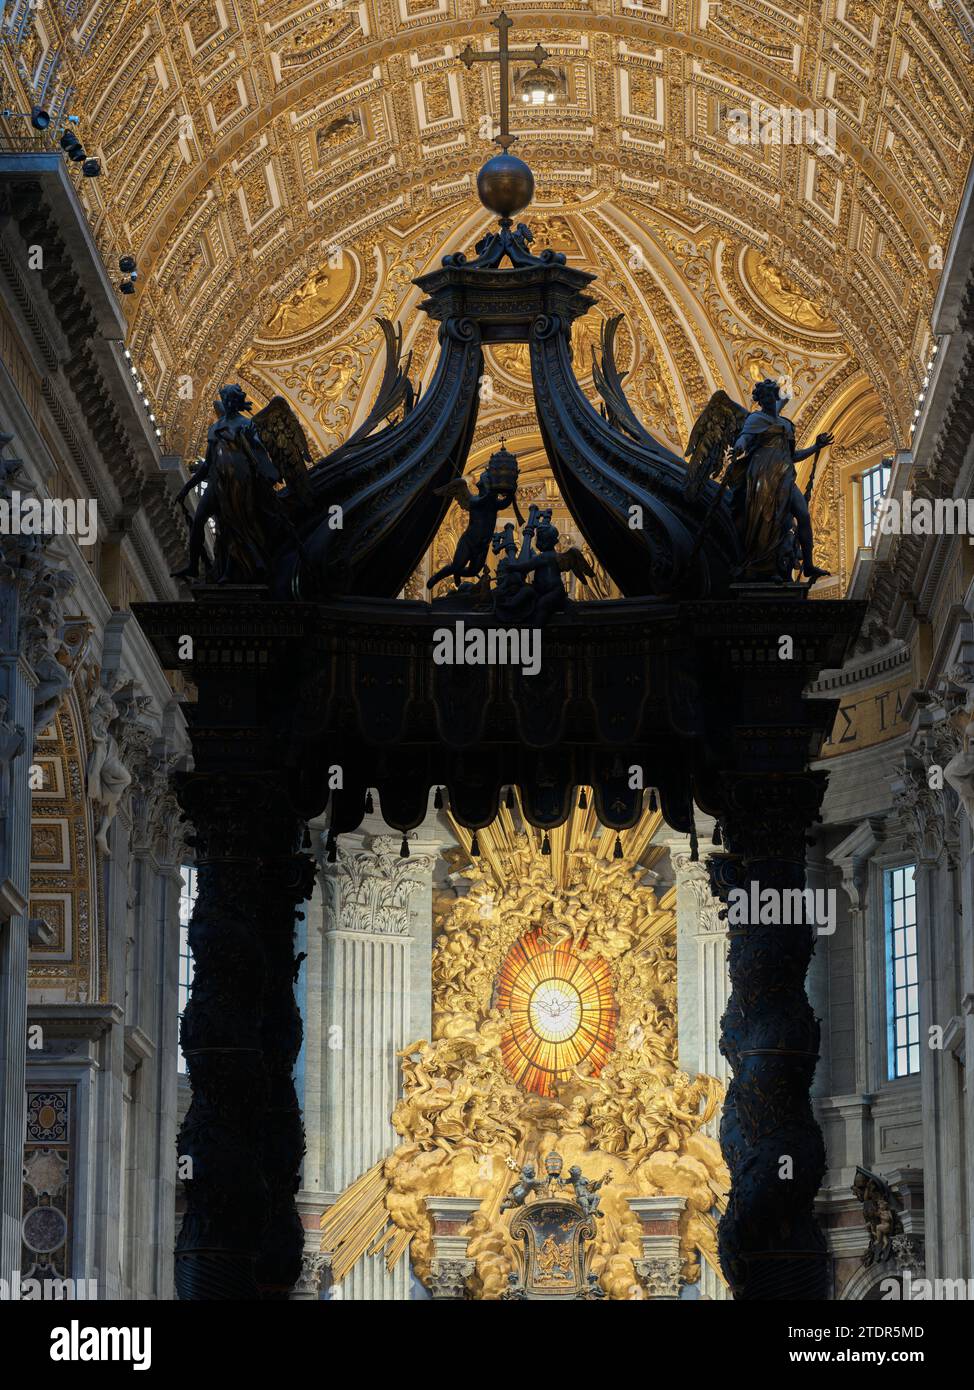 Dove, symbol of the Holy Spirit, over the cathedra Petri (chair of St Peter) in the apse of St Peter's basilica, Rome, Vatican, Italy. Stock Photo